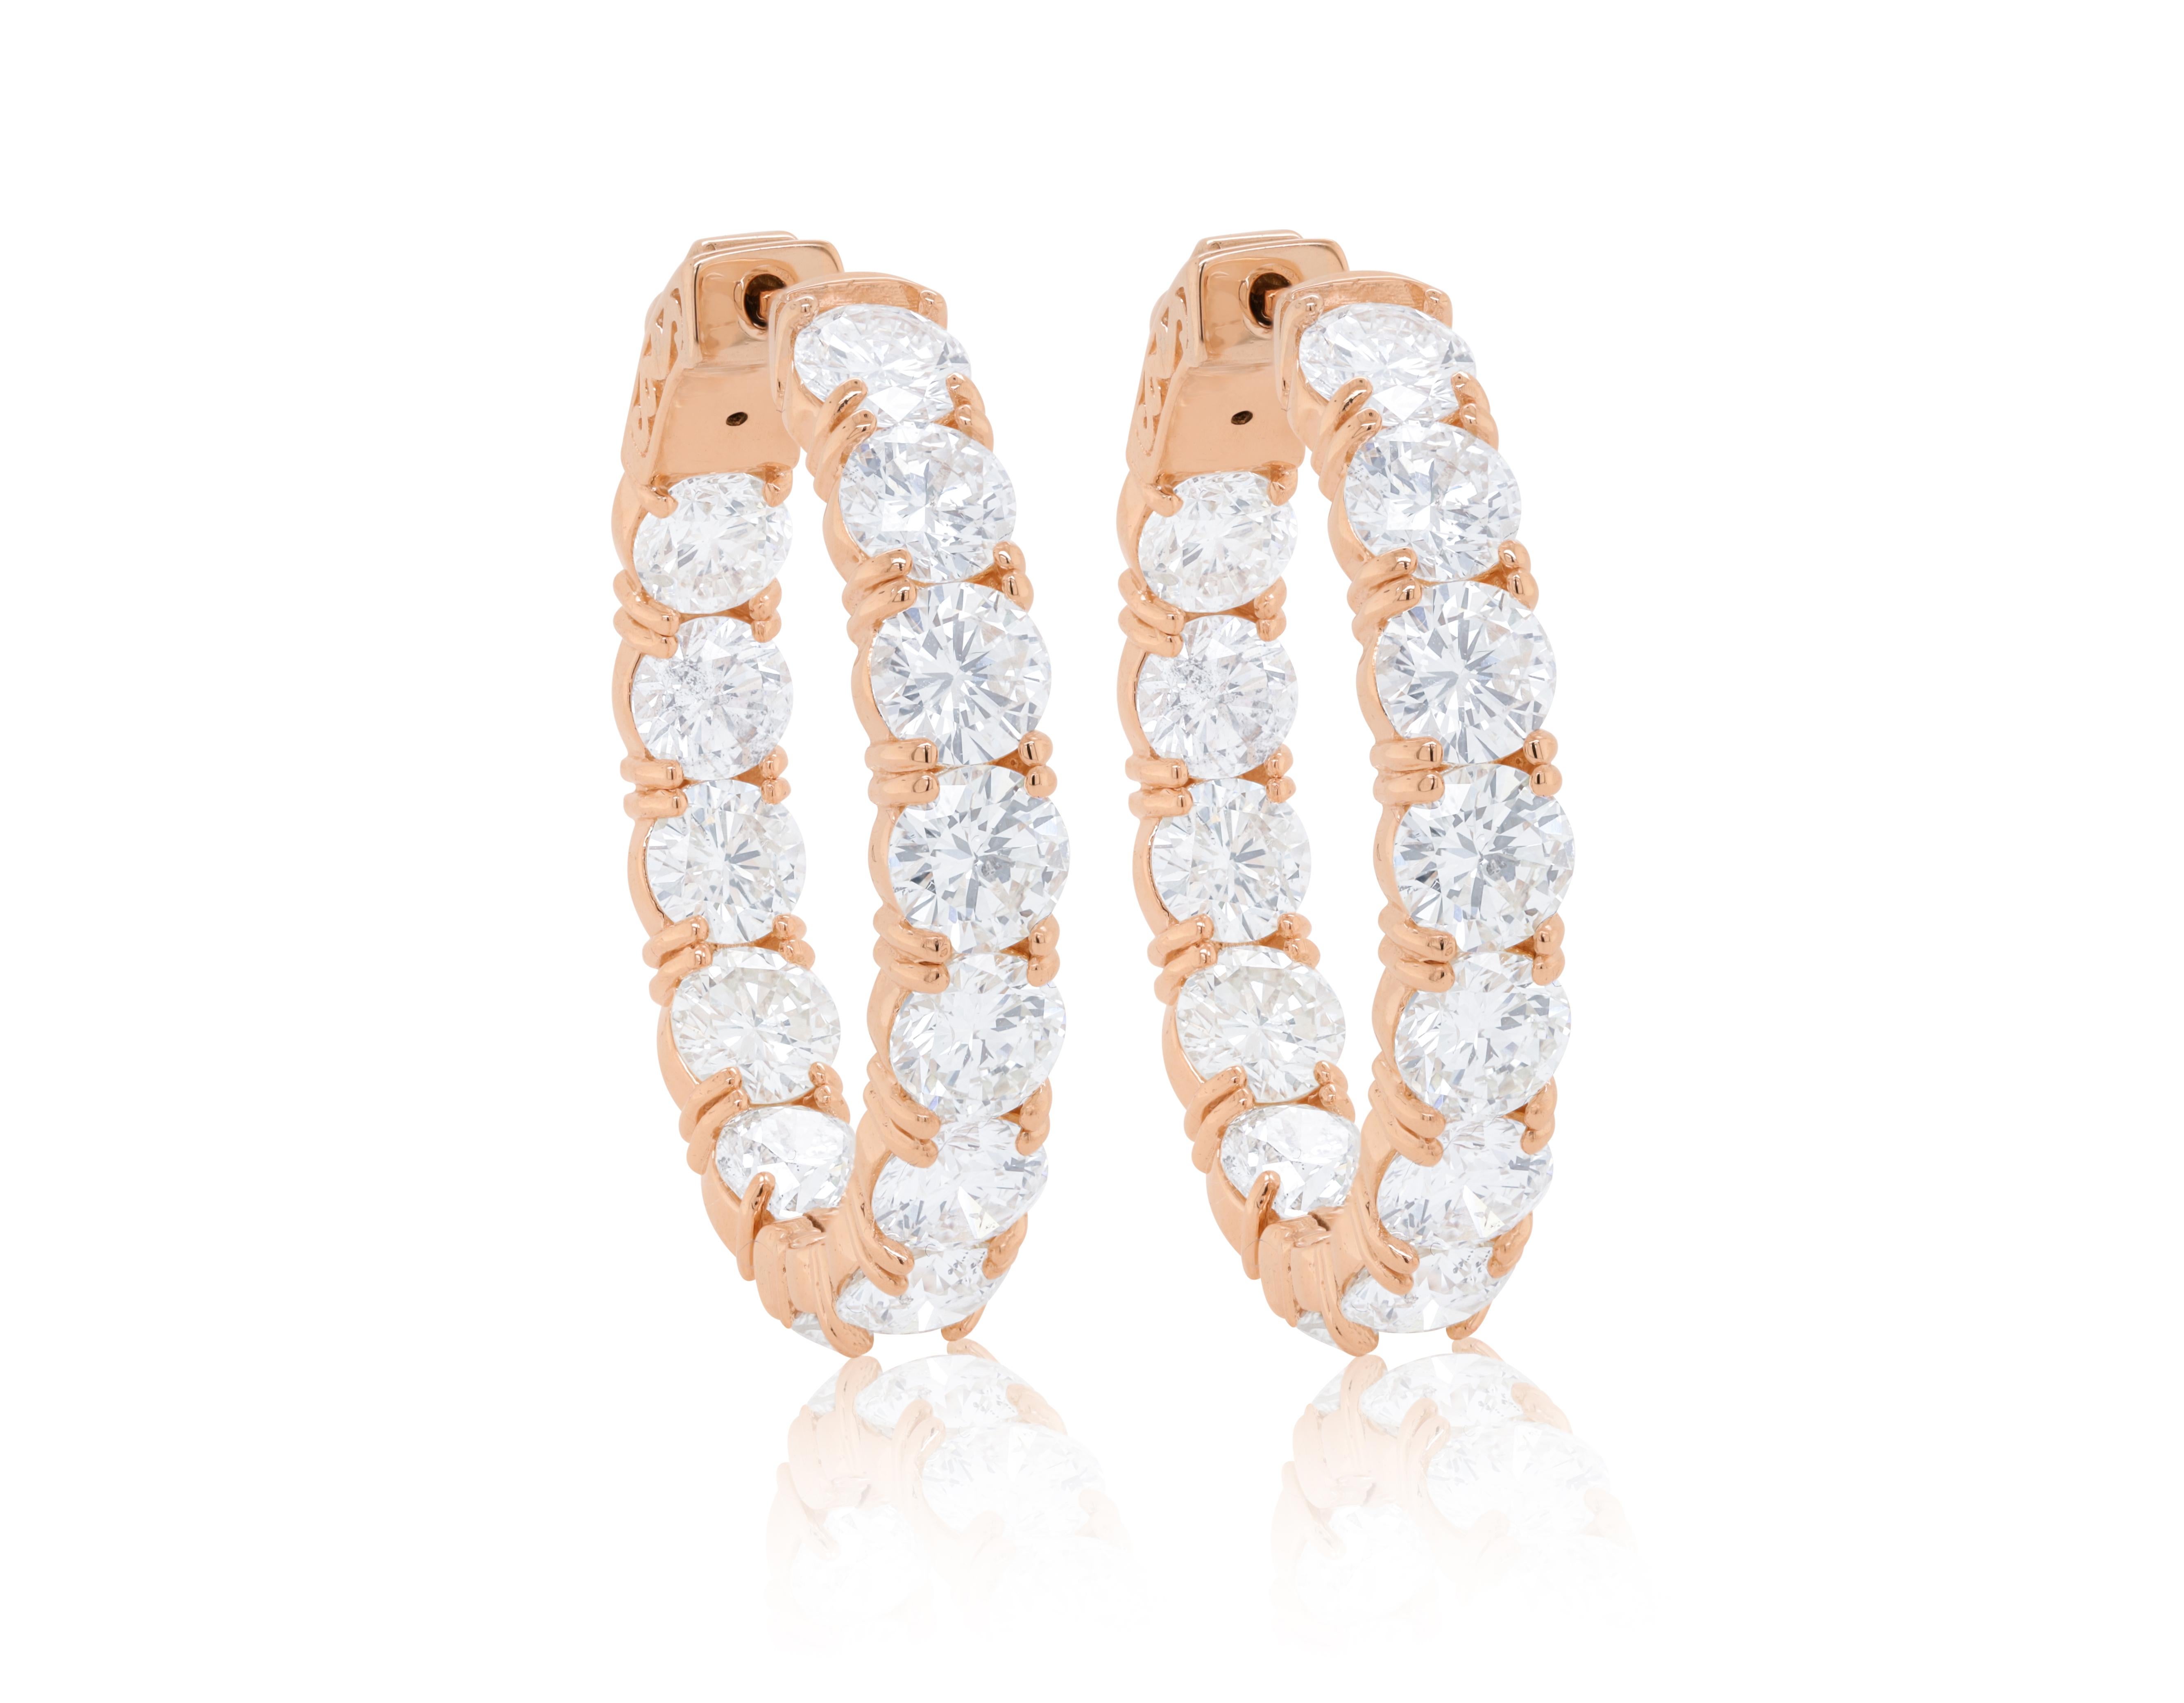 18 kt rose gold inside-out oval shape hoop earrings adorned with 13.45 cts tw of round diamonds (26 stones)
Diana M. is a leading supplier of top-quality fine jewelry for over 35 years.
Diana M is one-stop shop for all your jewelry shopping,